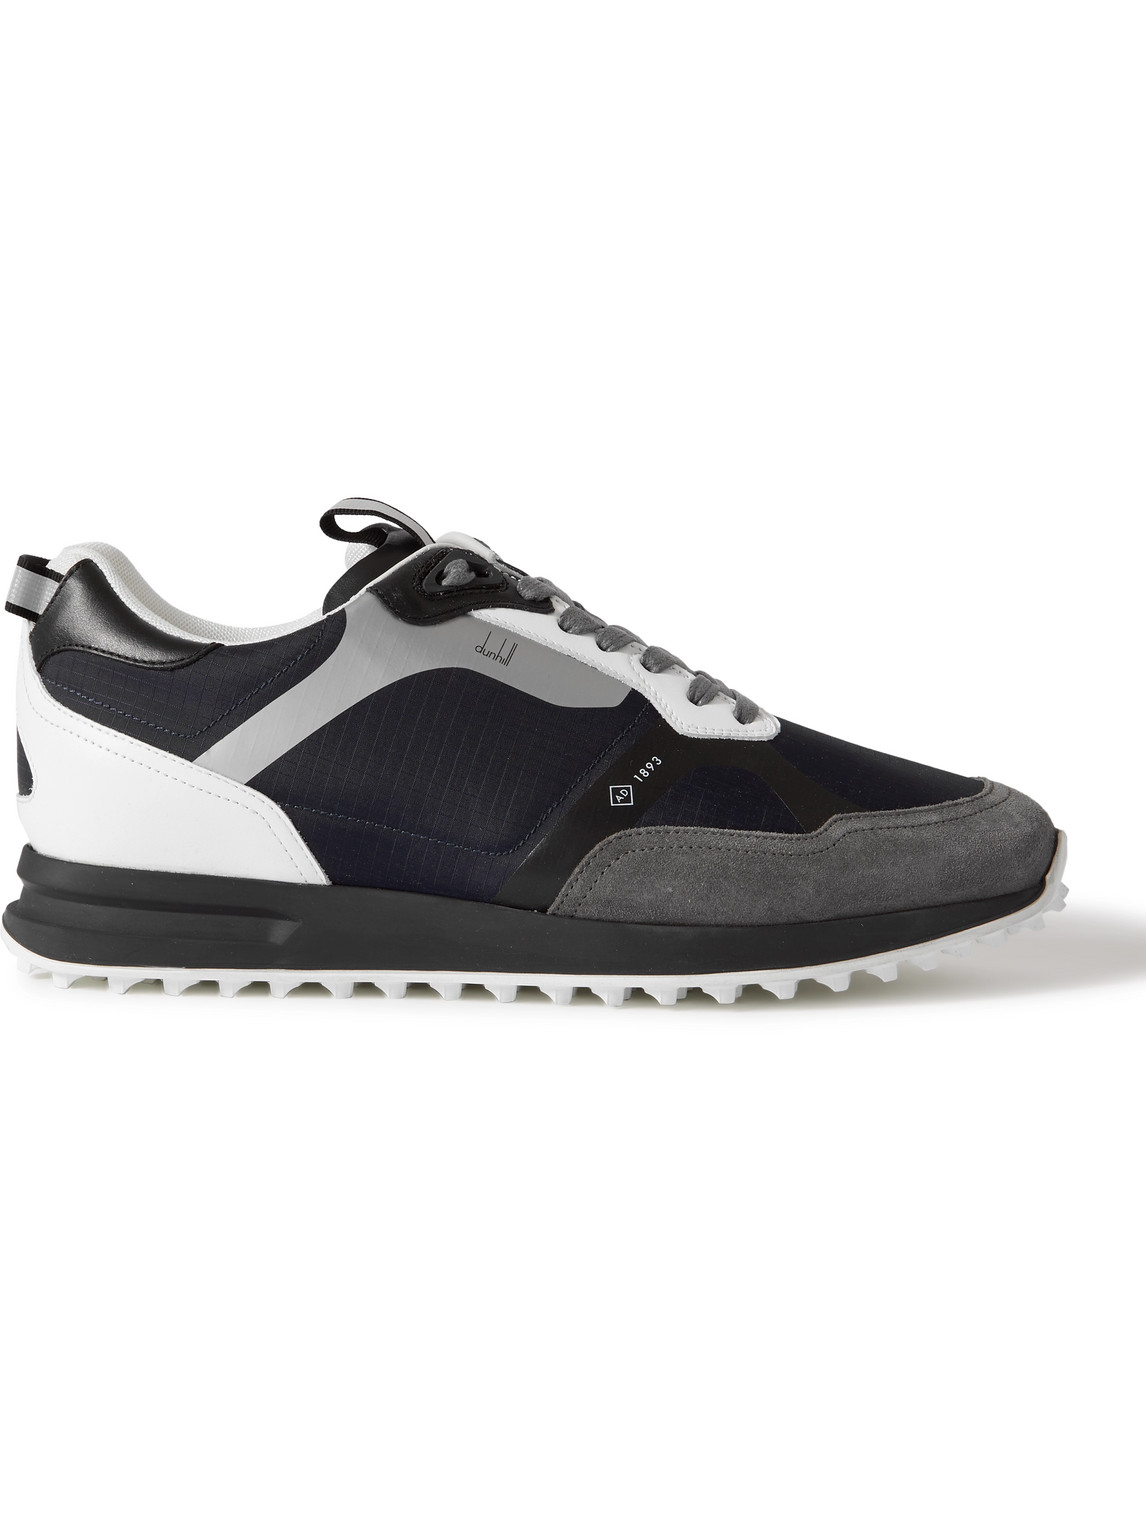 DUNHILL RADIAL 2.0 LEATHER AND SUEDE-TRIMMED RIPSTOP SNEAKERS